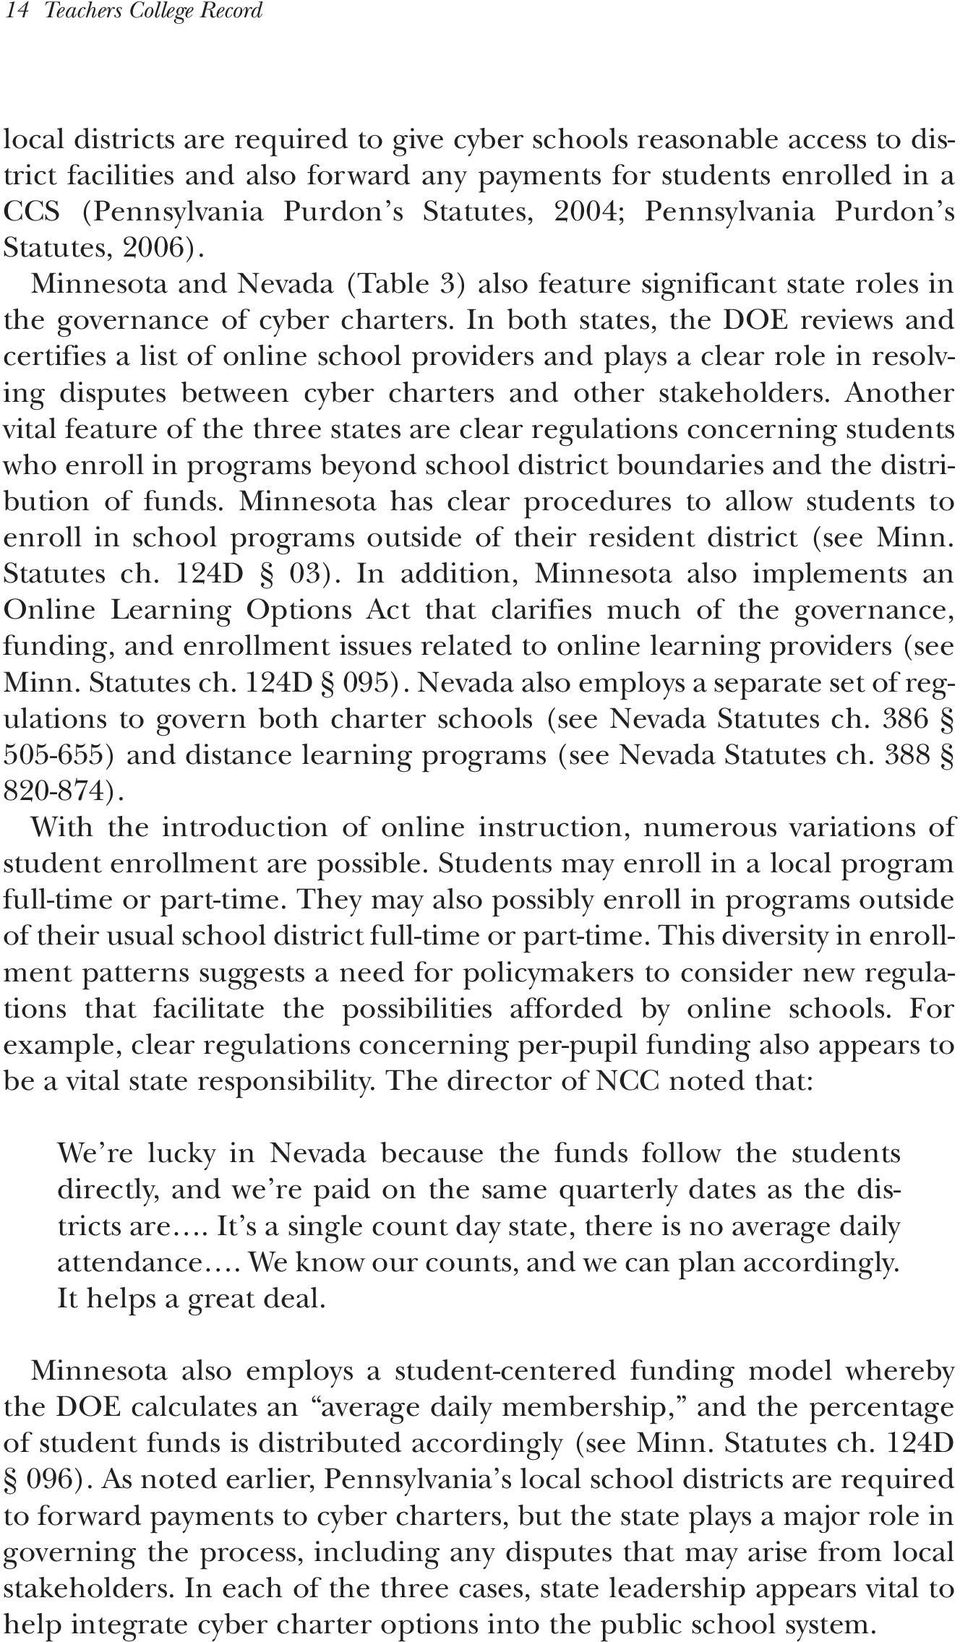 In both states, the DOE reviews and certifies a list of online school providers and plays a clear role in resolving disputes between cyber charters and other stakeholders.